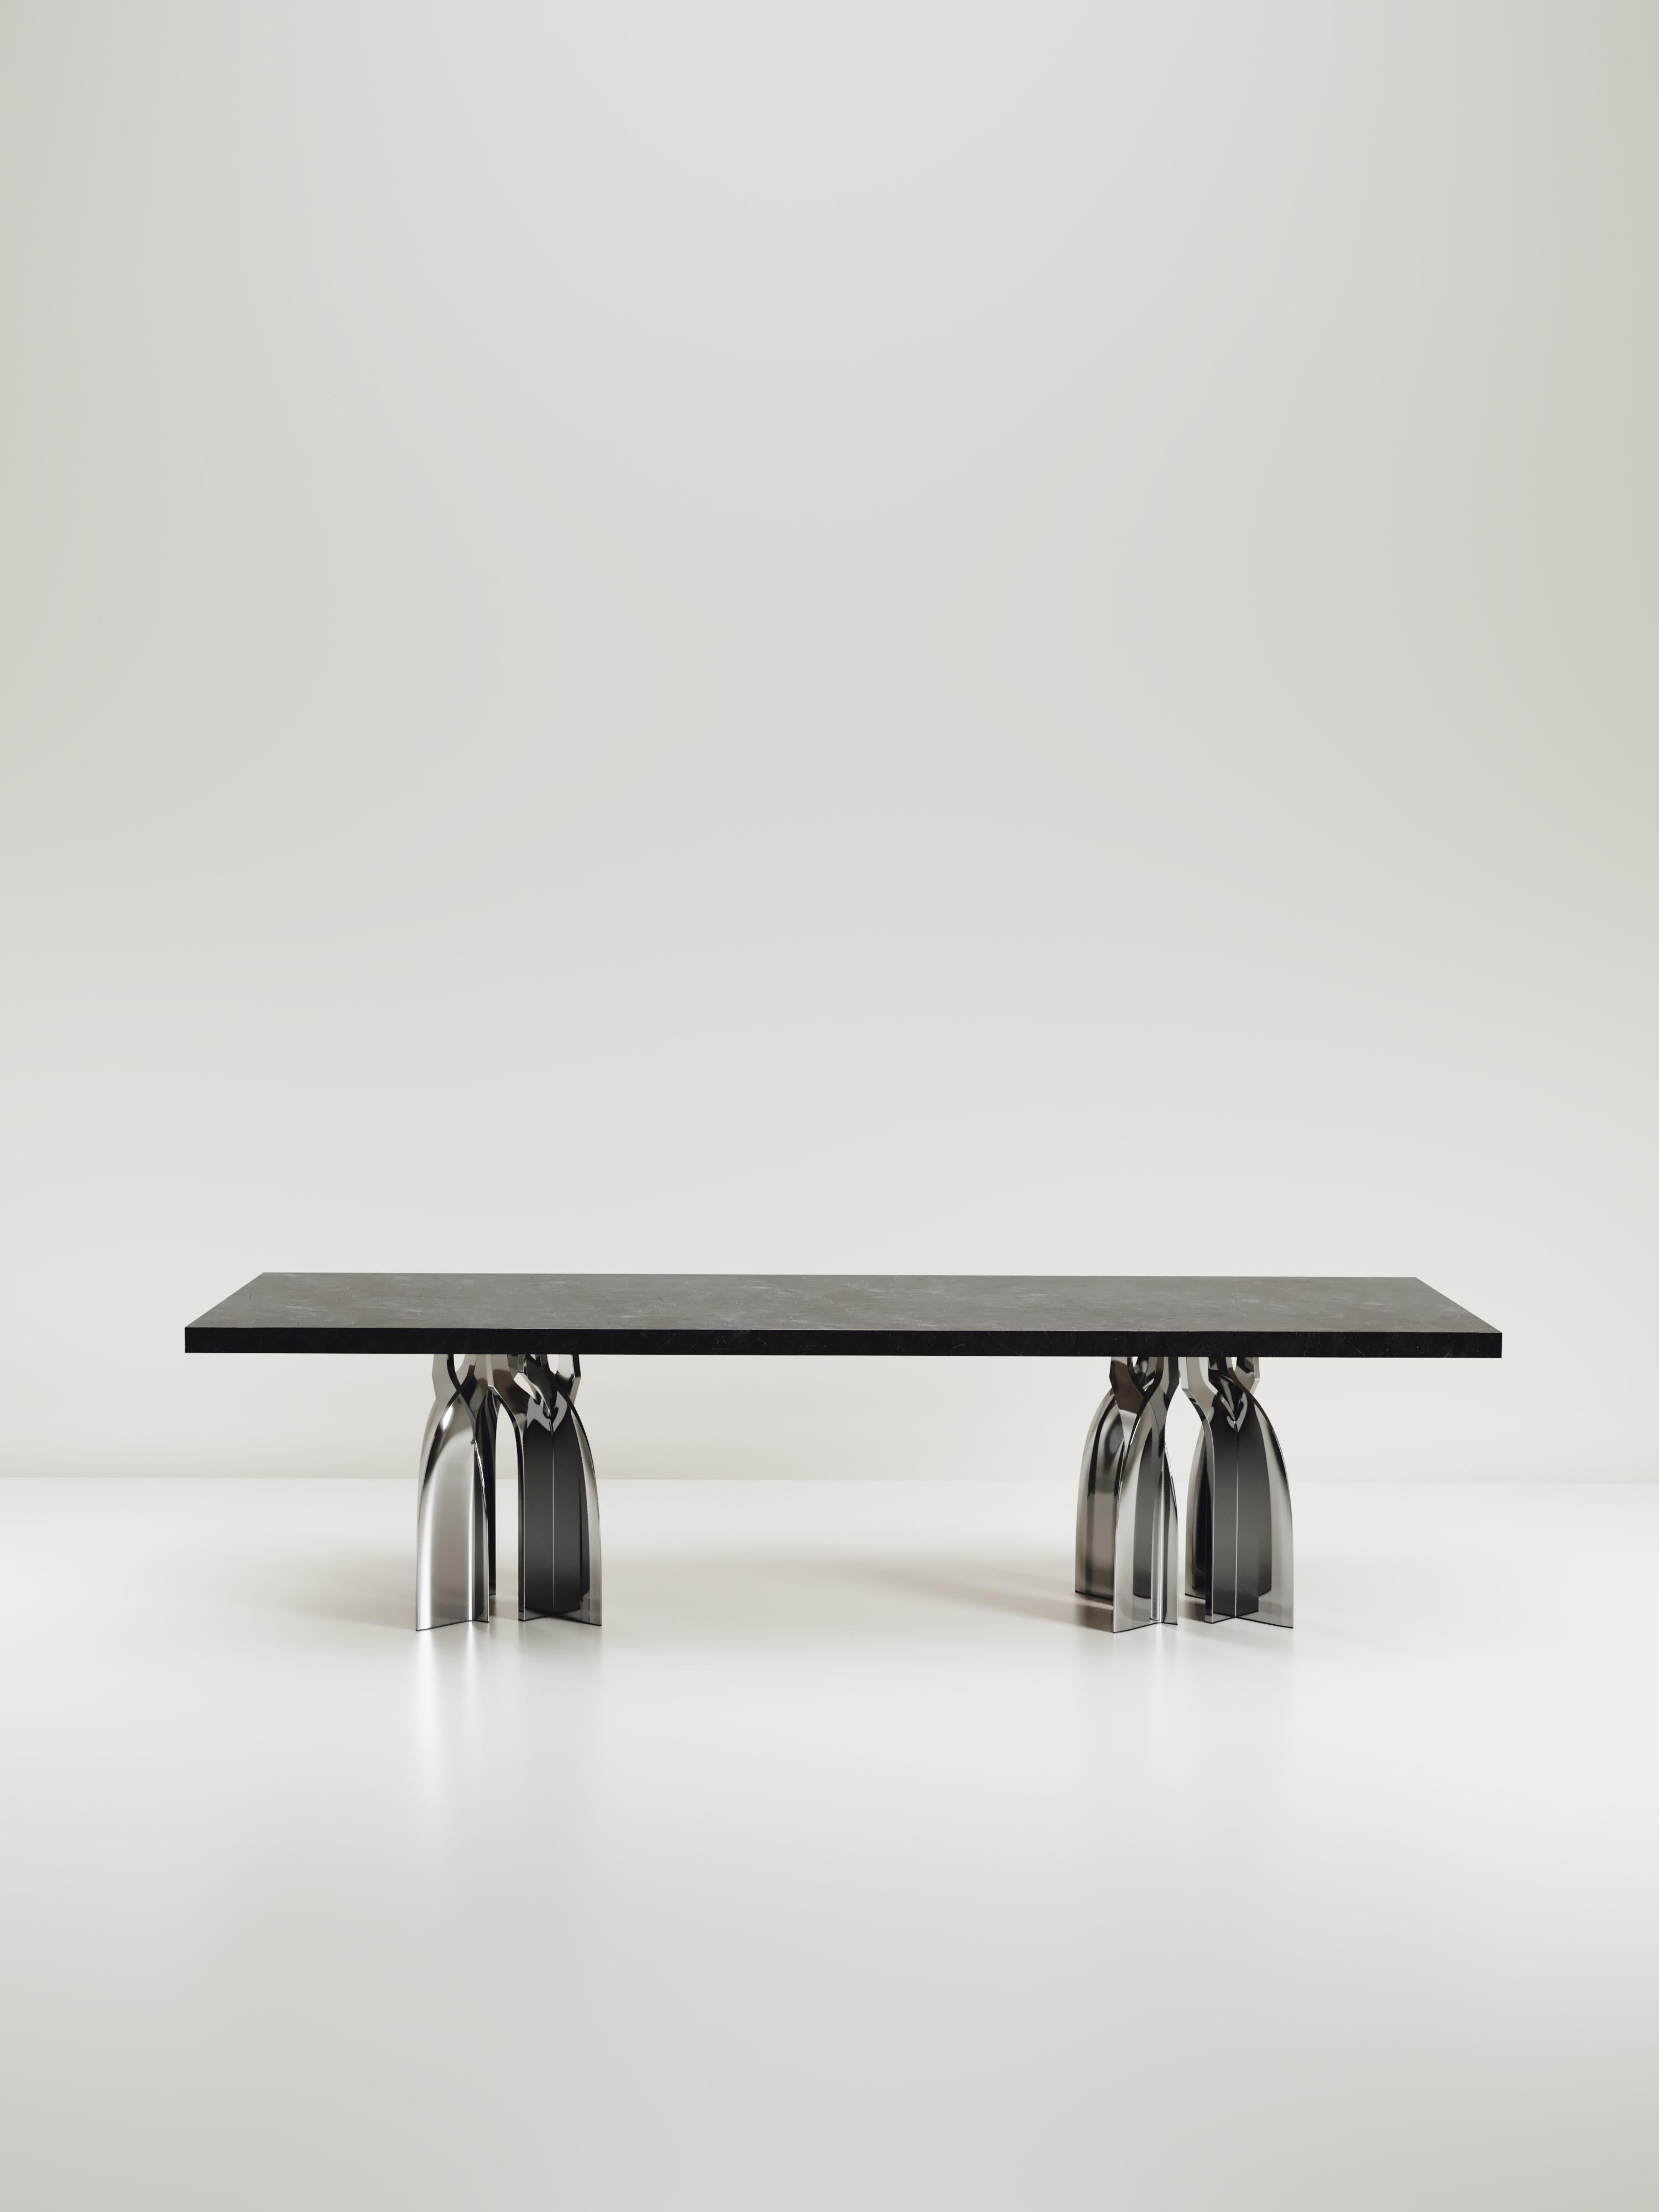 Hand-Crafted Sculptural Dining Table in Shagreen & Stainless Steel by Kifu Paris For Sale